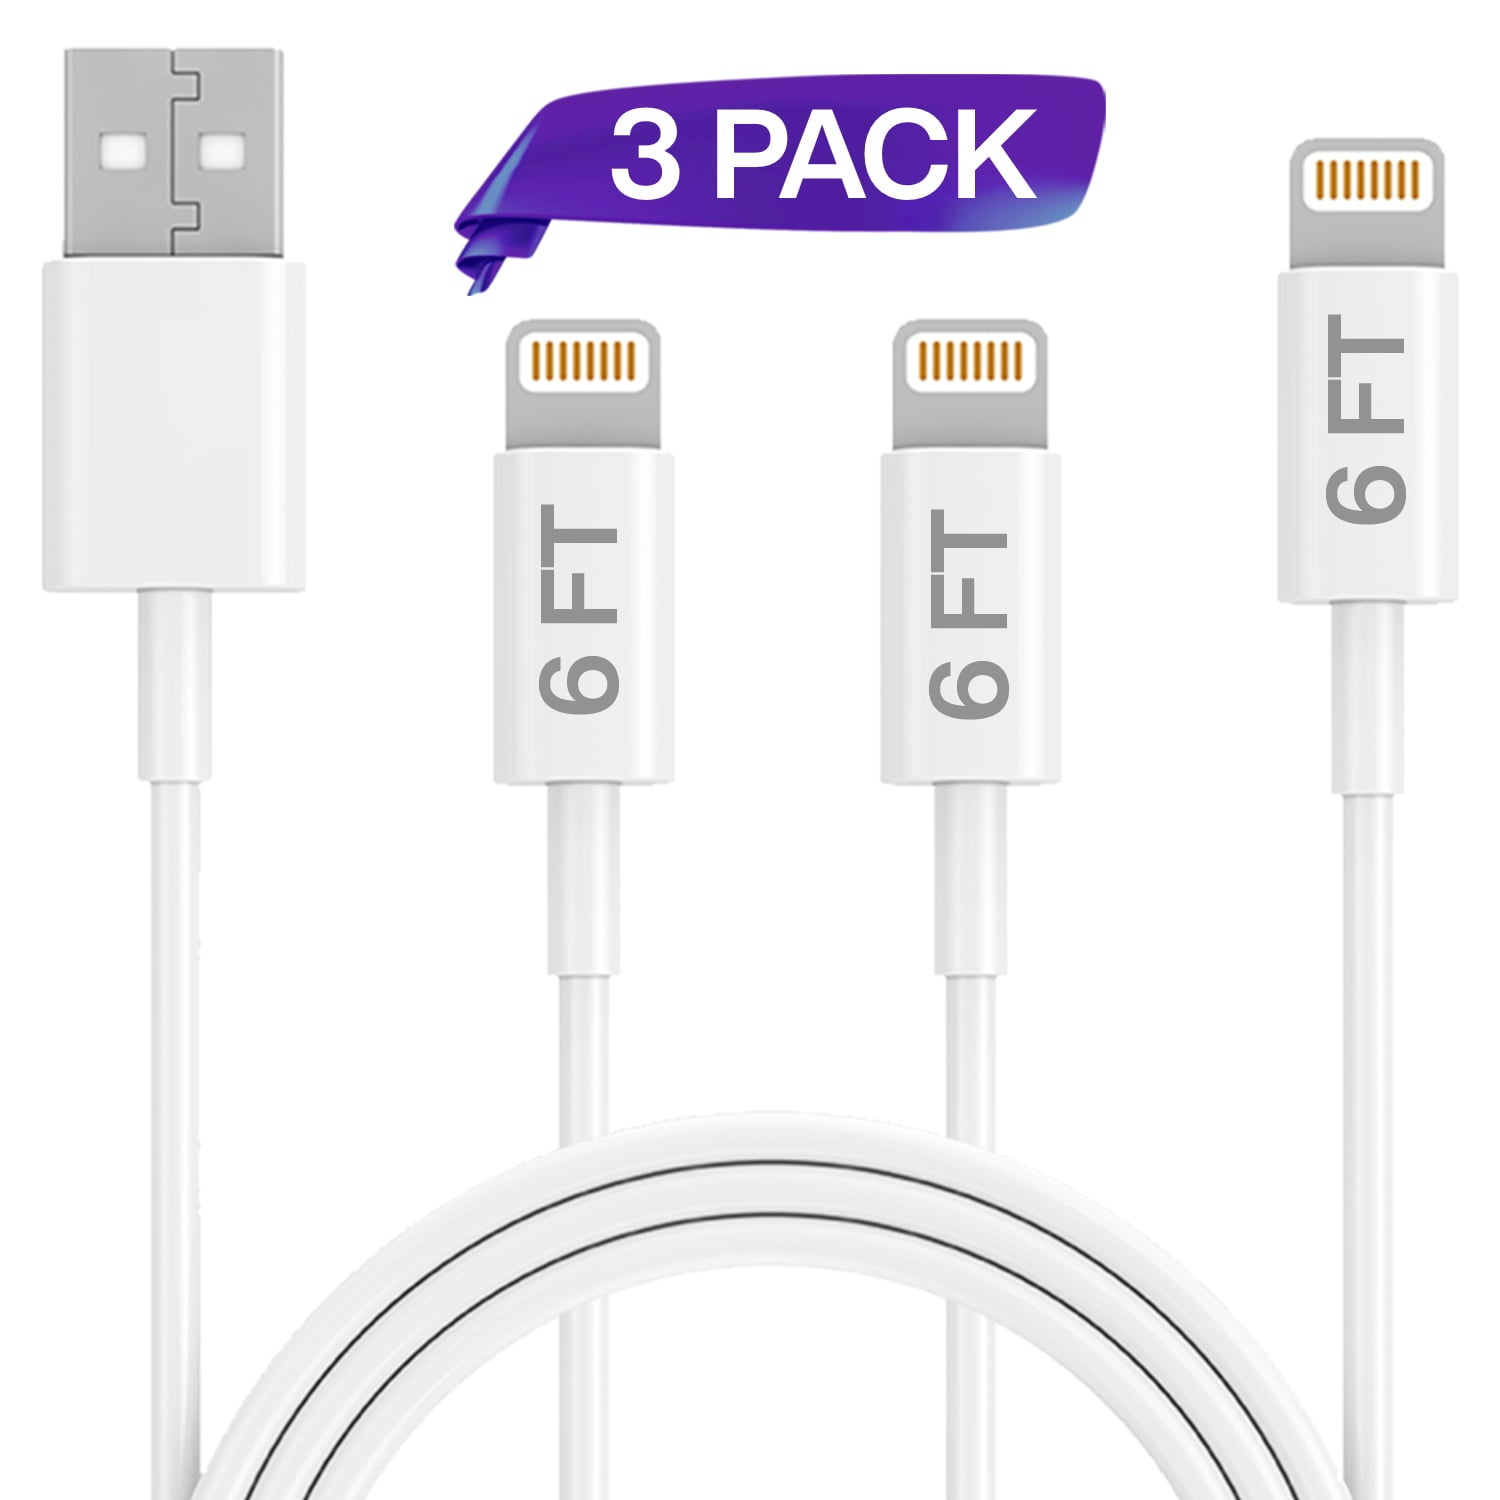 Ixir iPhone Lightning Cable Set, 3 Pack 6FT USB Cable, Compatible with Apple iPhone Xs,Xs Max,XR,X,8,8 Plus,7,7 Plus,6S,6S Plus,iPad Air,Mini/iPod Touch/Case, Fast Charging & Syncing Cord